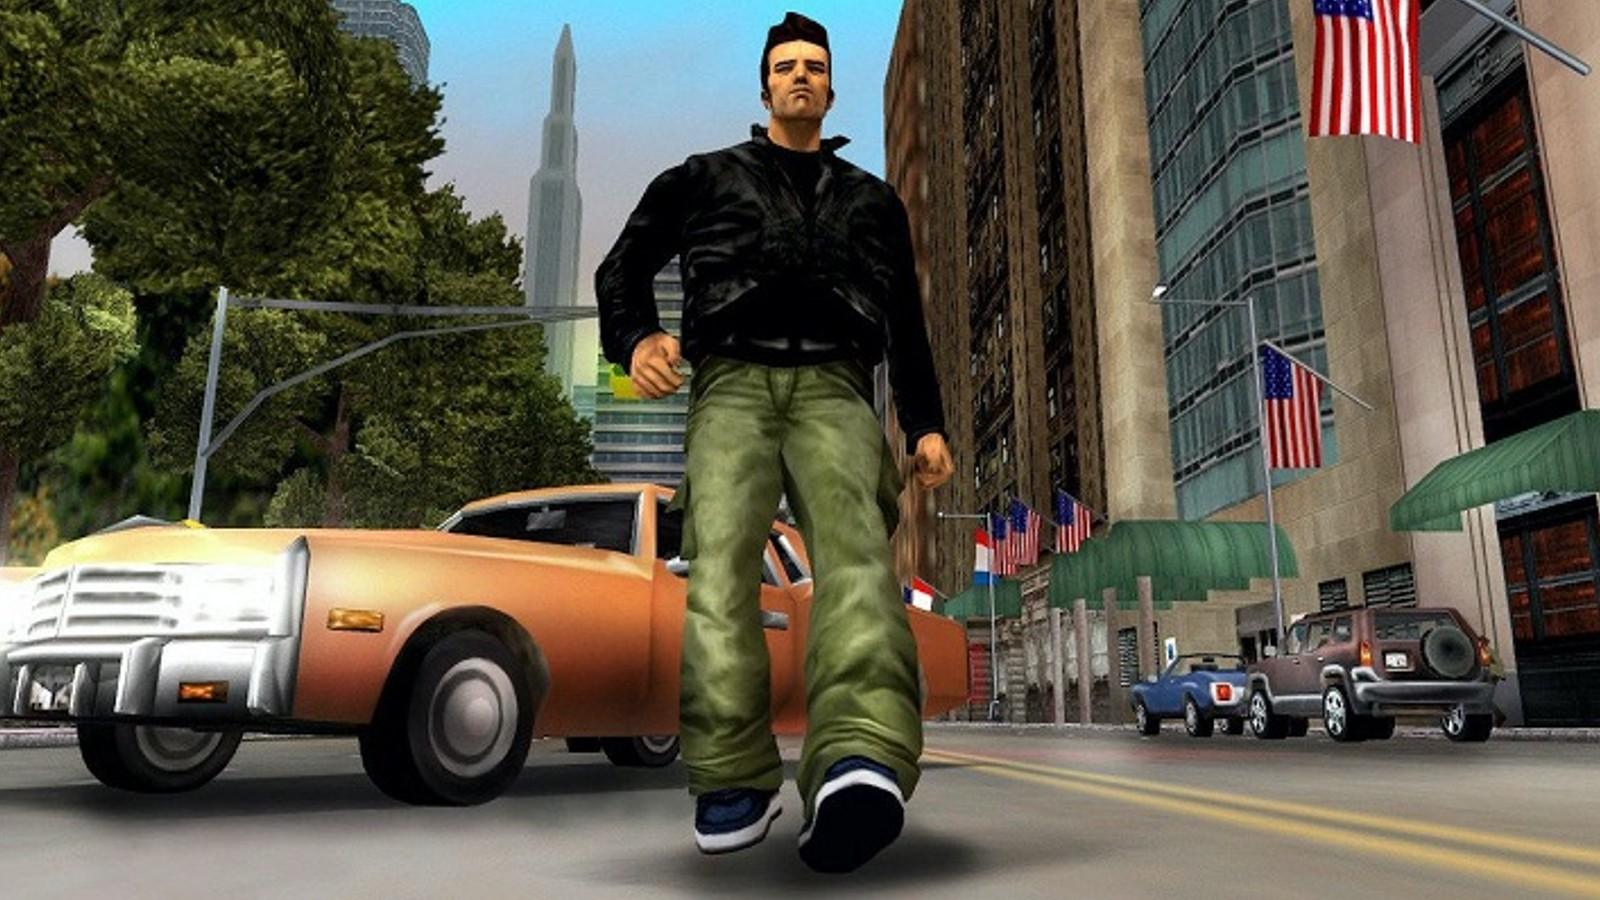 Grand Theft Auto: The Trilogy – The Definitive Edition' Arrives on